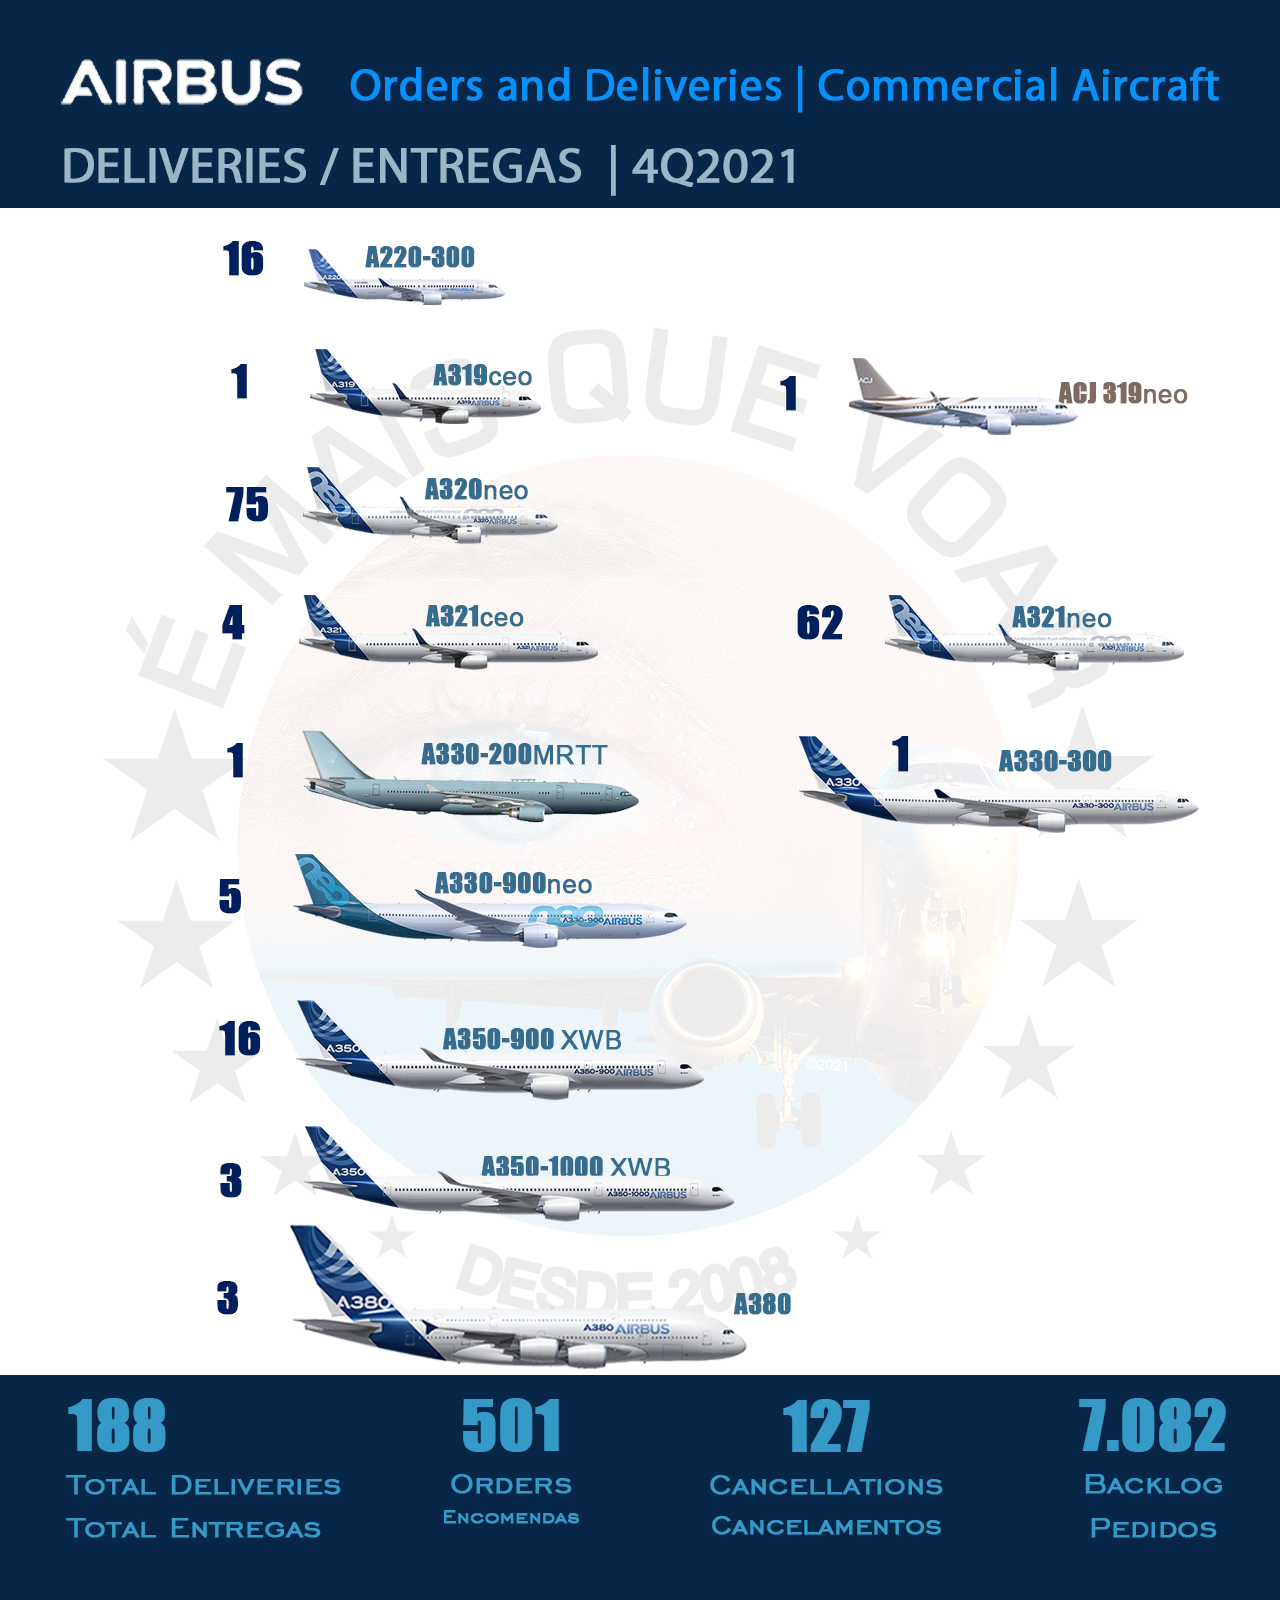 Airbus - Devileries Commercial Aircrafts 4Q2021 | MORE THAN FLY